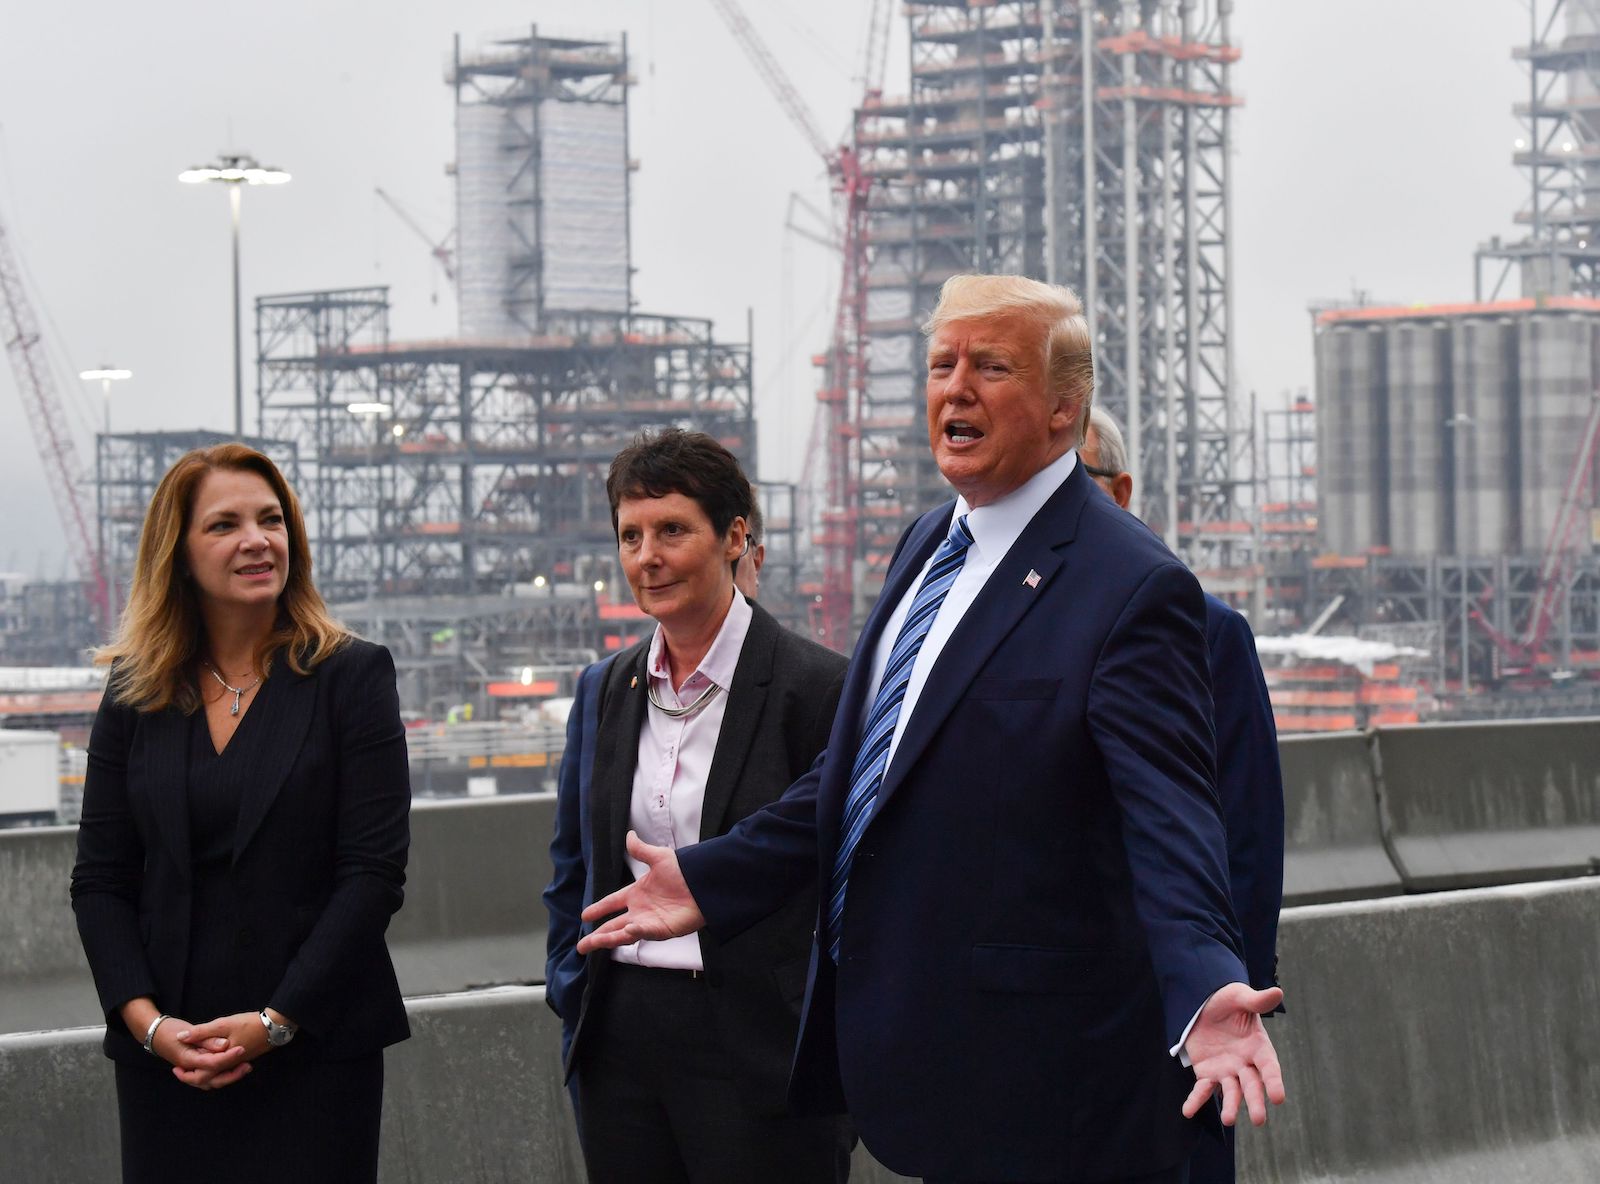 U.S. President Donald Trump, with Shell Oil company President Gretchen Watkins (L) and Shell Pennsylvania Vice President Hilary Mercer (C), tours the Shell Pennsylvania Petrochemicals Complex in Monaca, Pennsylvania, on August 13, 2019.